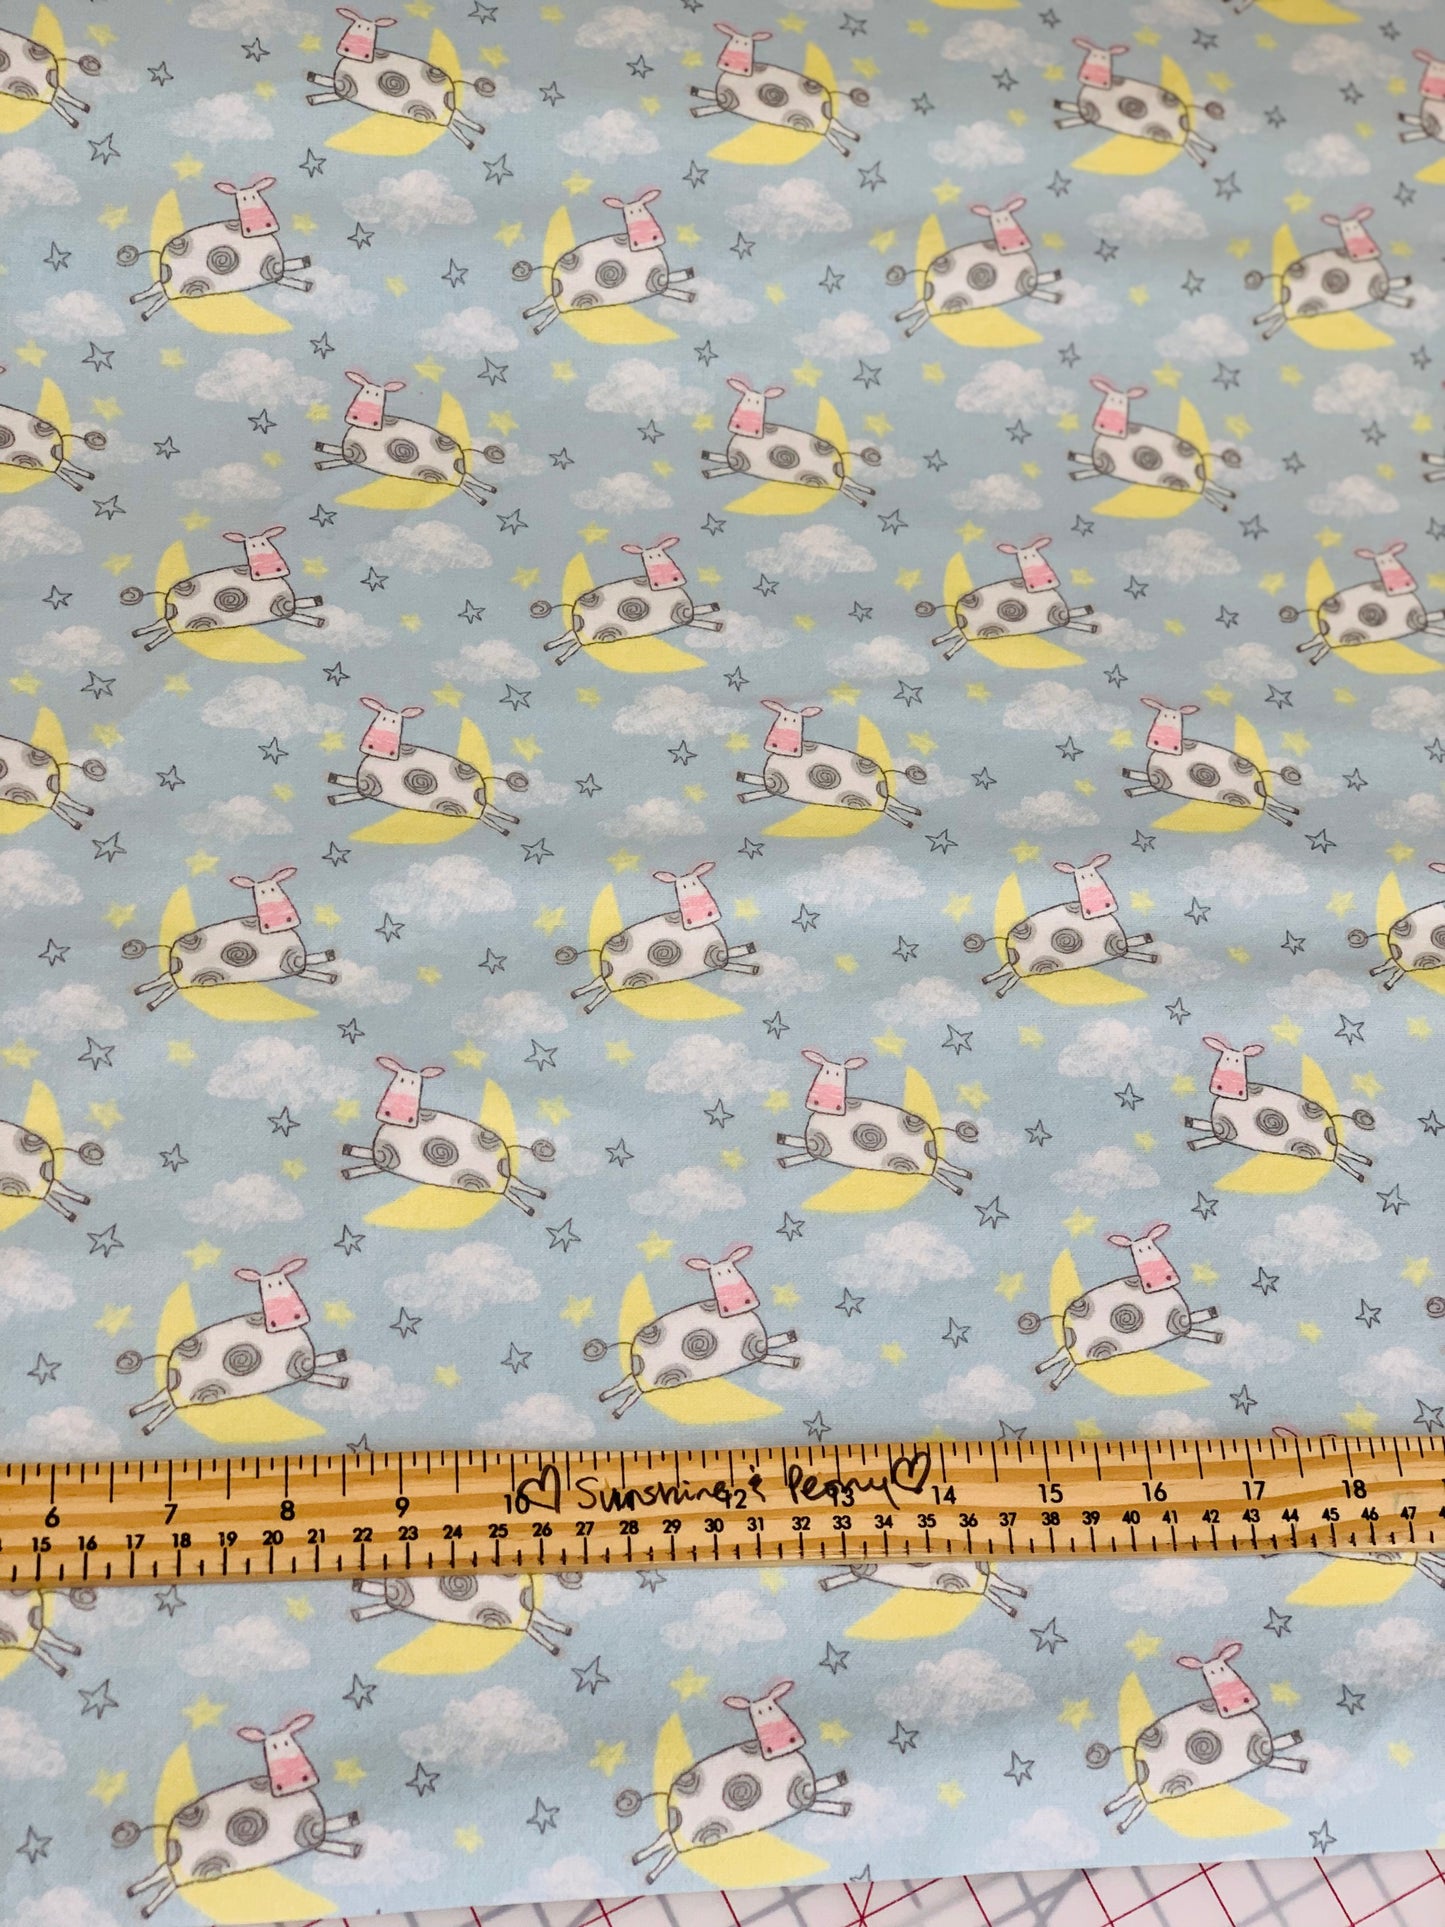 Flannel - Comfy Flannel - Blue Cow Jumping Over the Moon - Priced by the half Metre